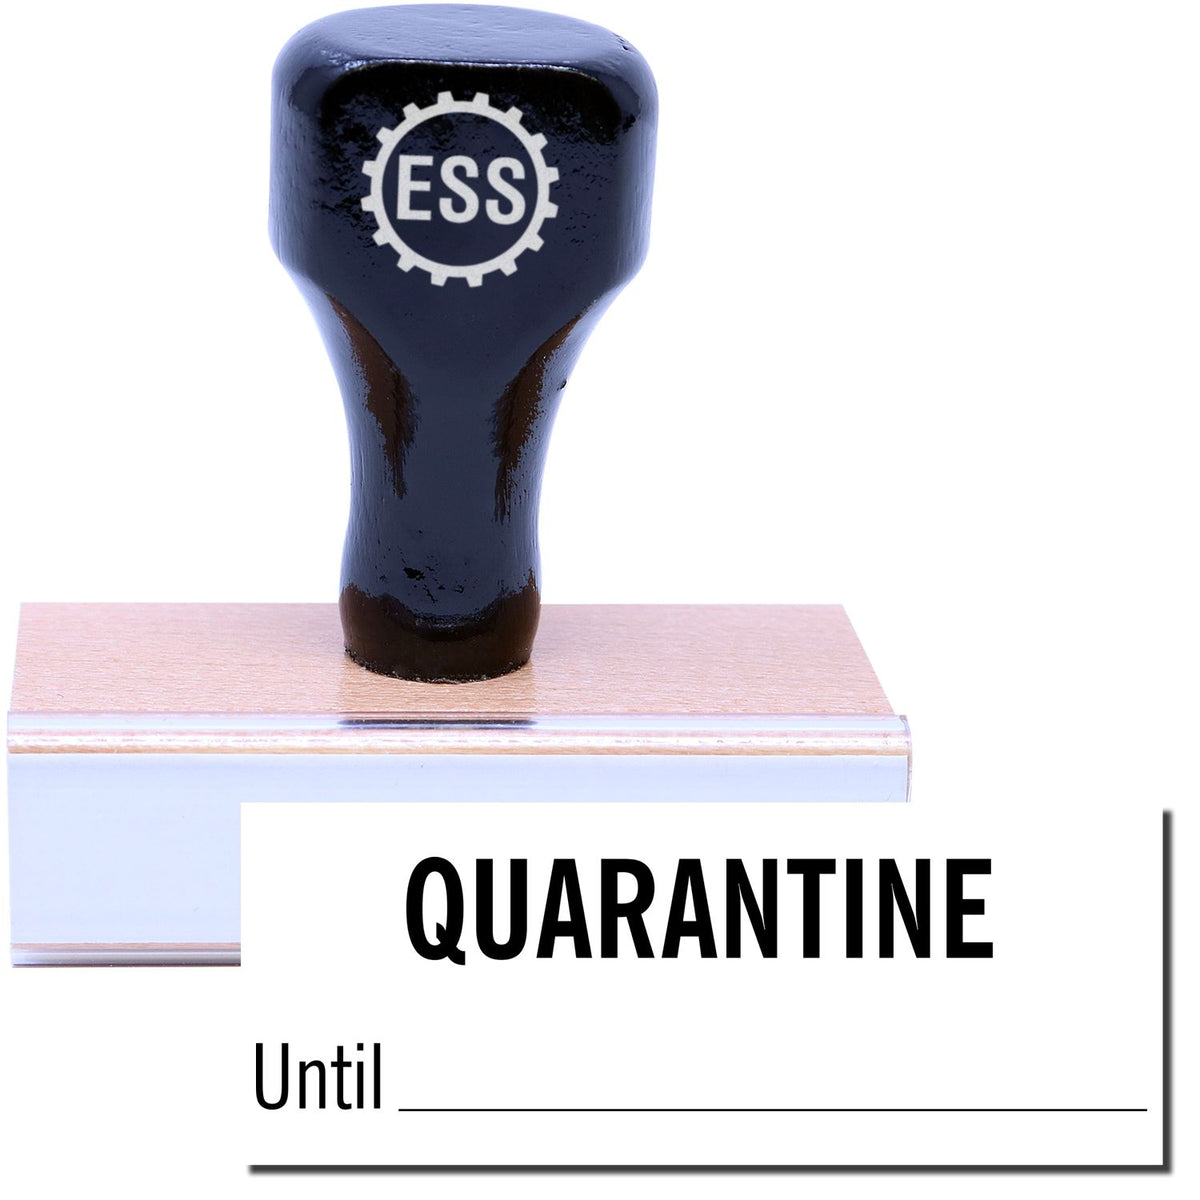 A stock office rubber stamp with a stamped image showing how the text &quot;QUARANTINE Until&quot; with a line is displayed after stamping.